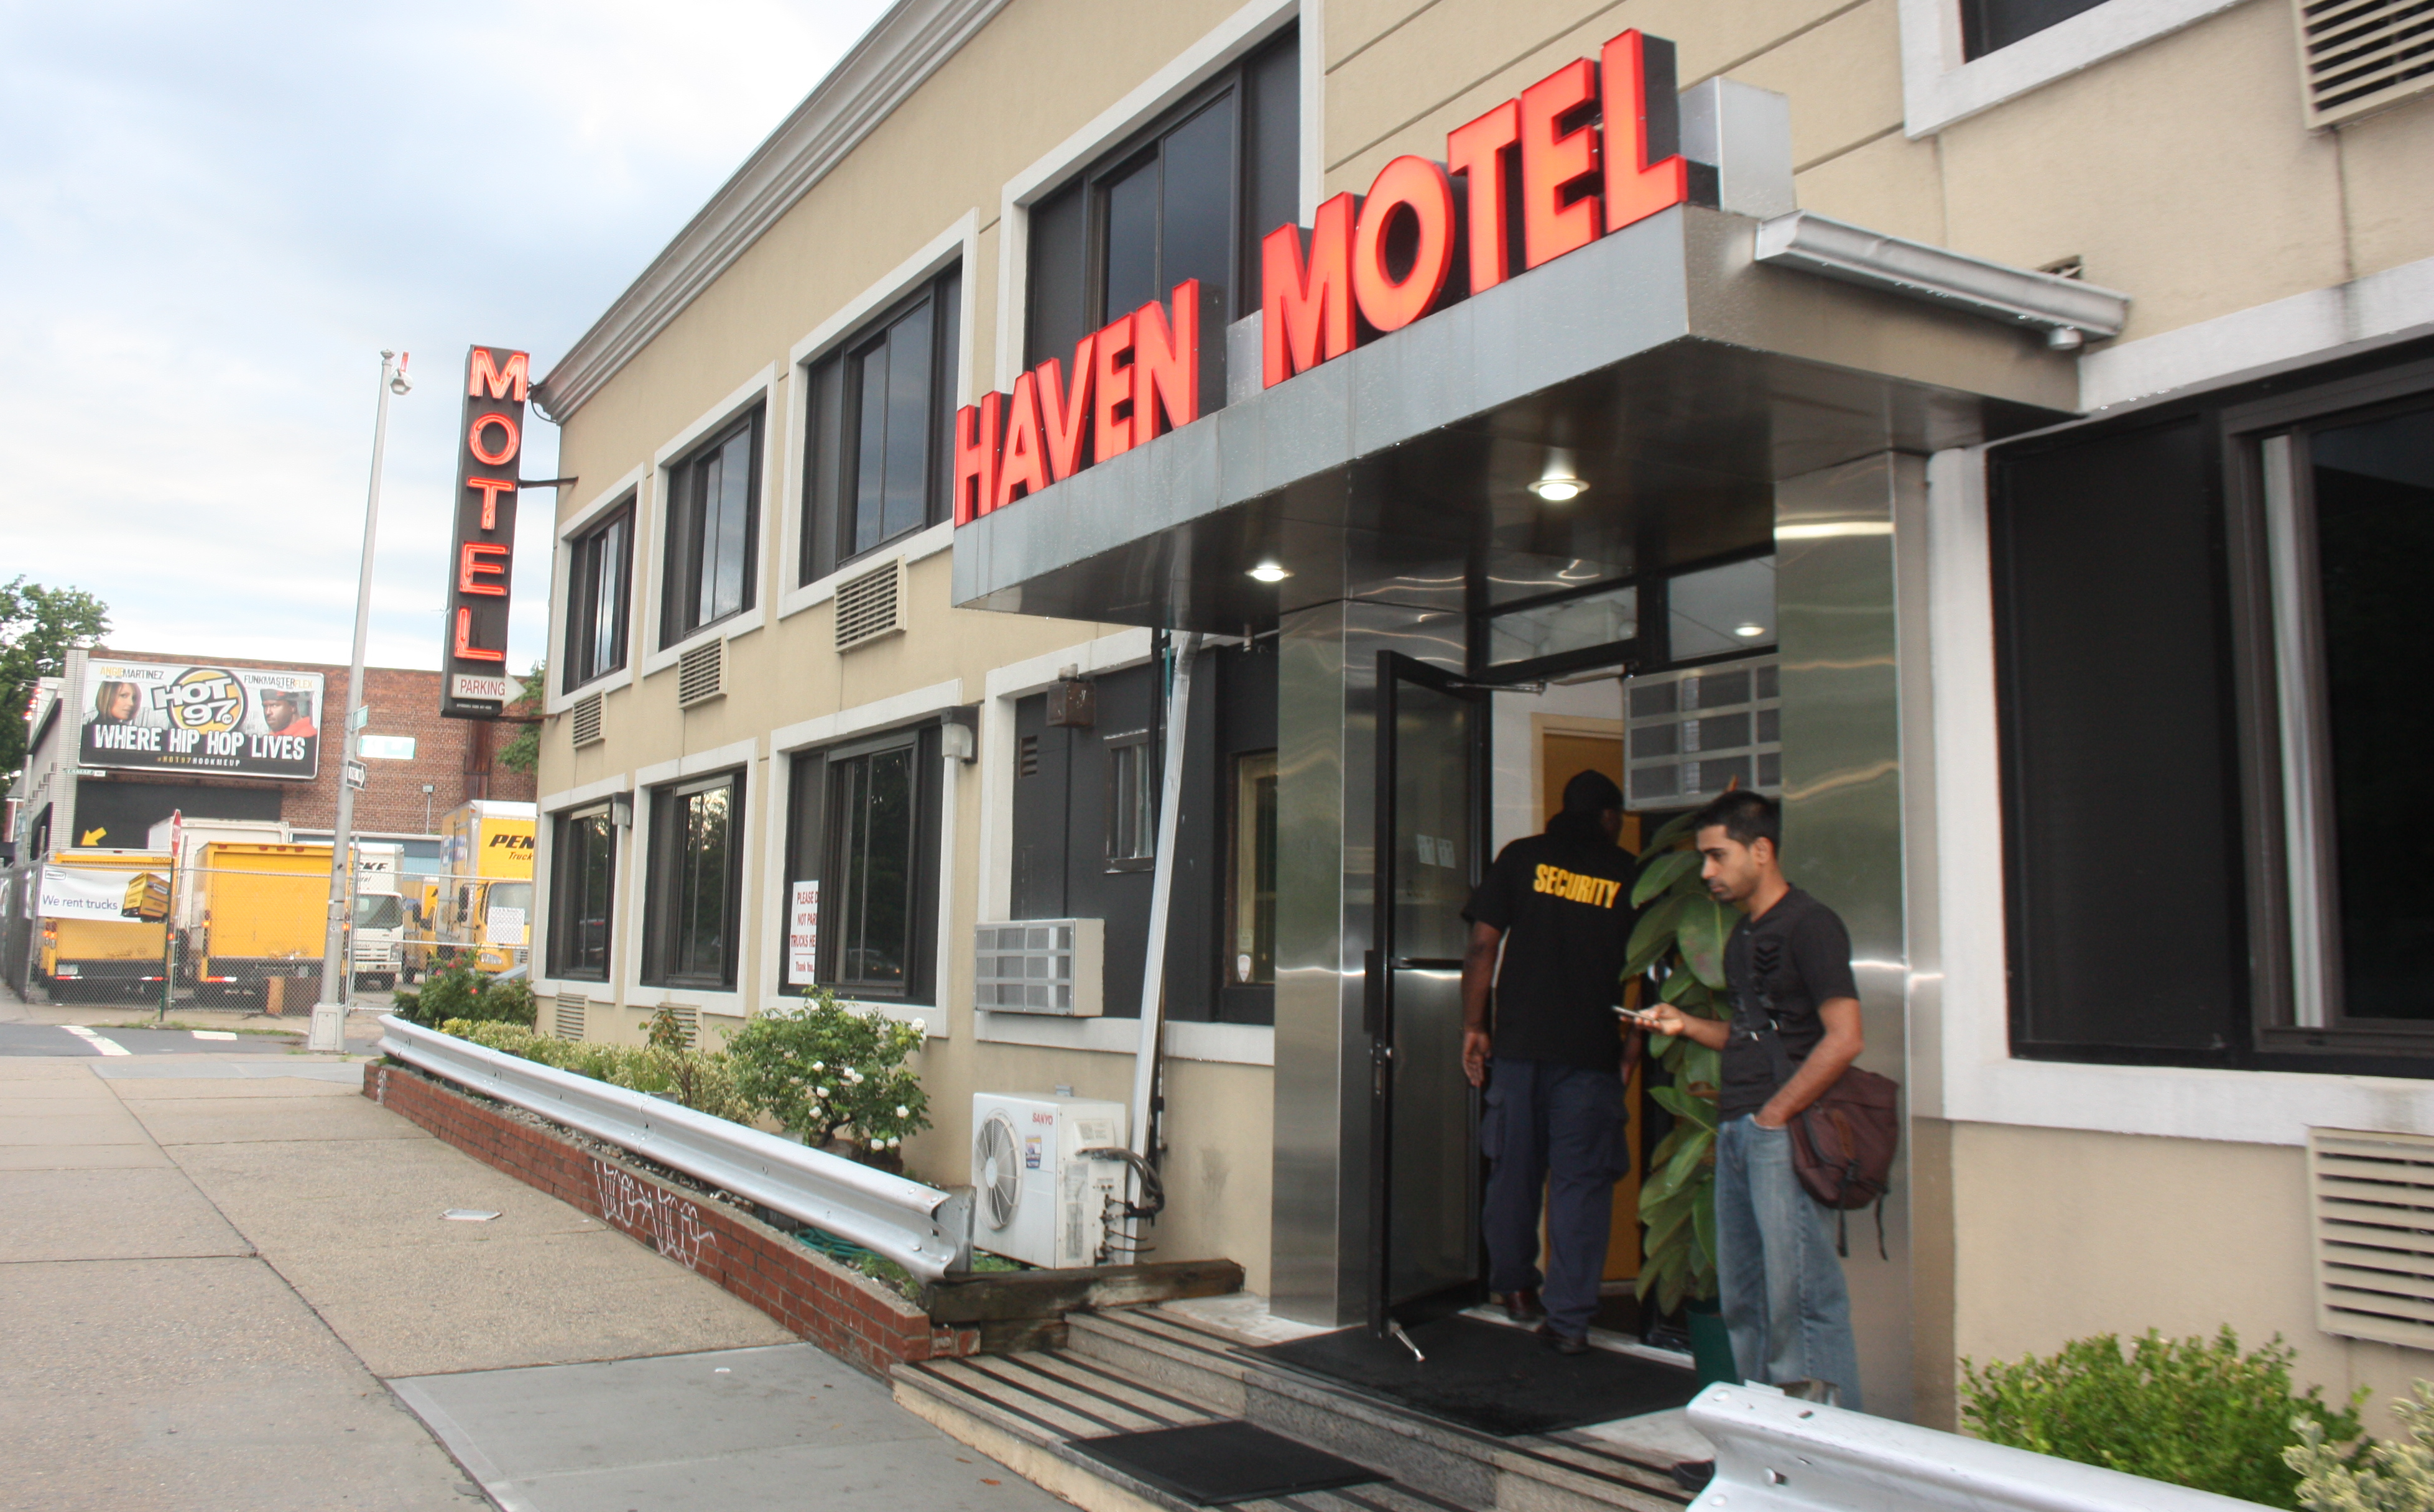 Motel Resurfaces As A Haven For Prostitution The Forum Newsgroup